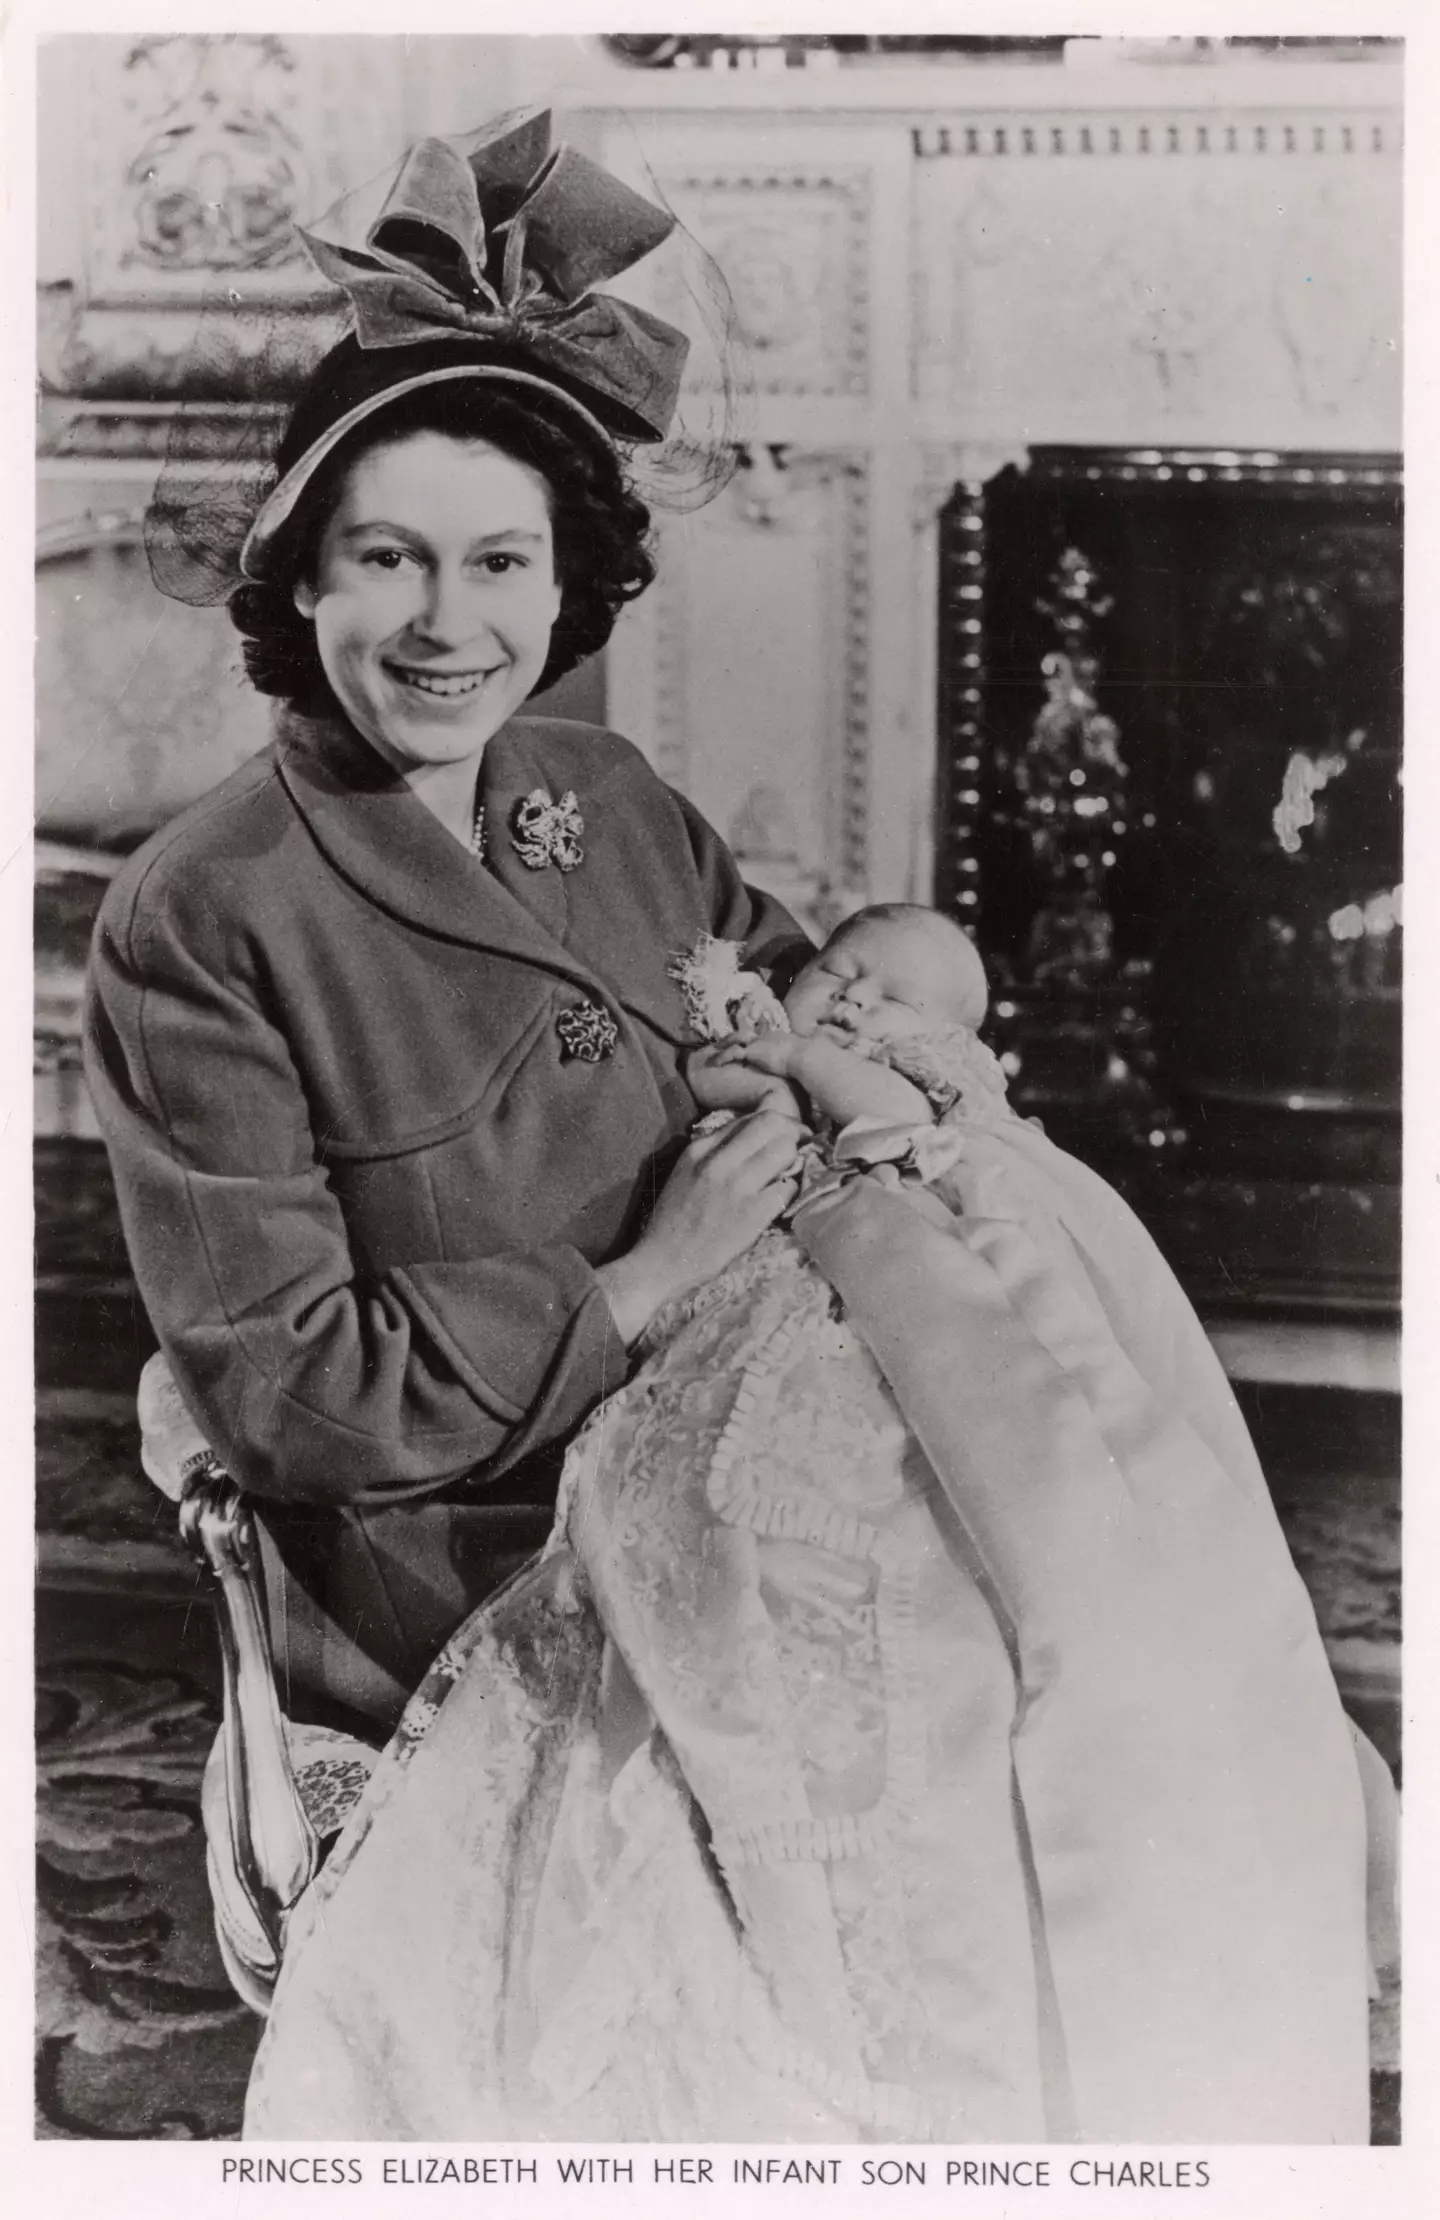 Princess Elizabeth - later Queen Elizabeth II - with newborn son Prince Charles - later King Charles III.